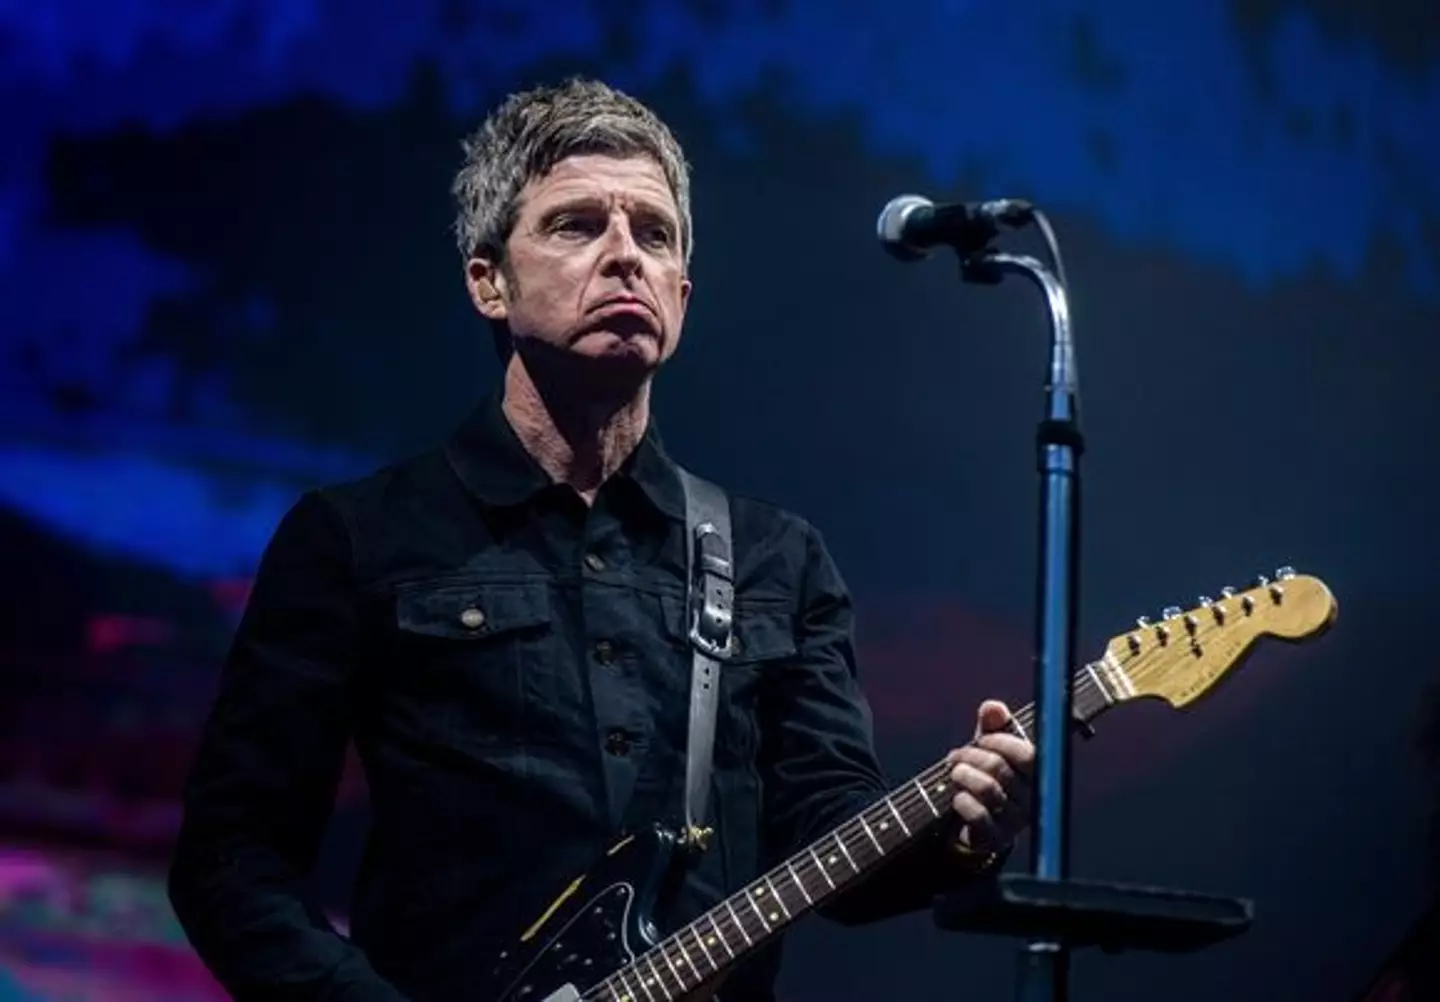 Noel Gallagher again ruled out a reunion in the interview.